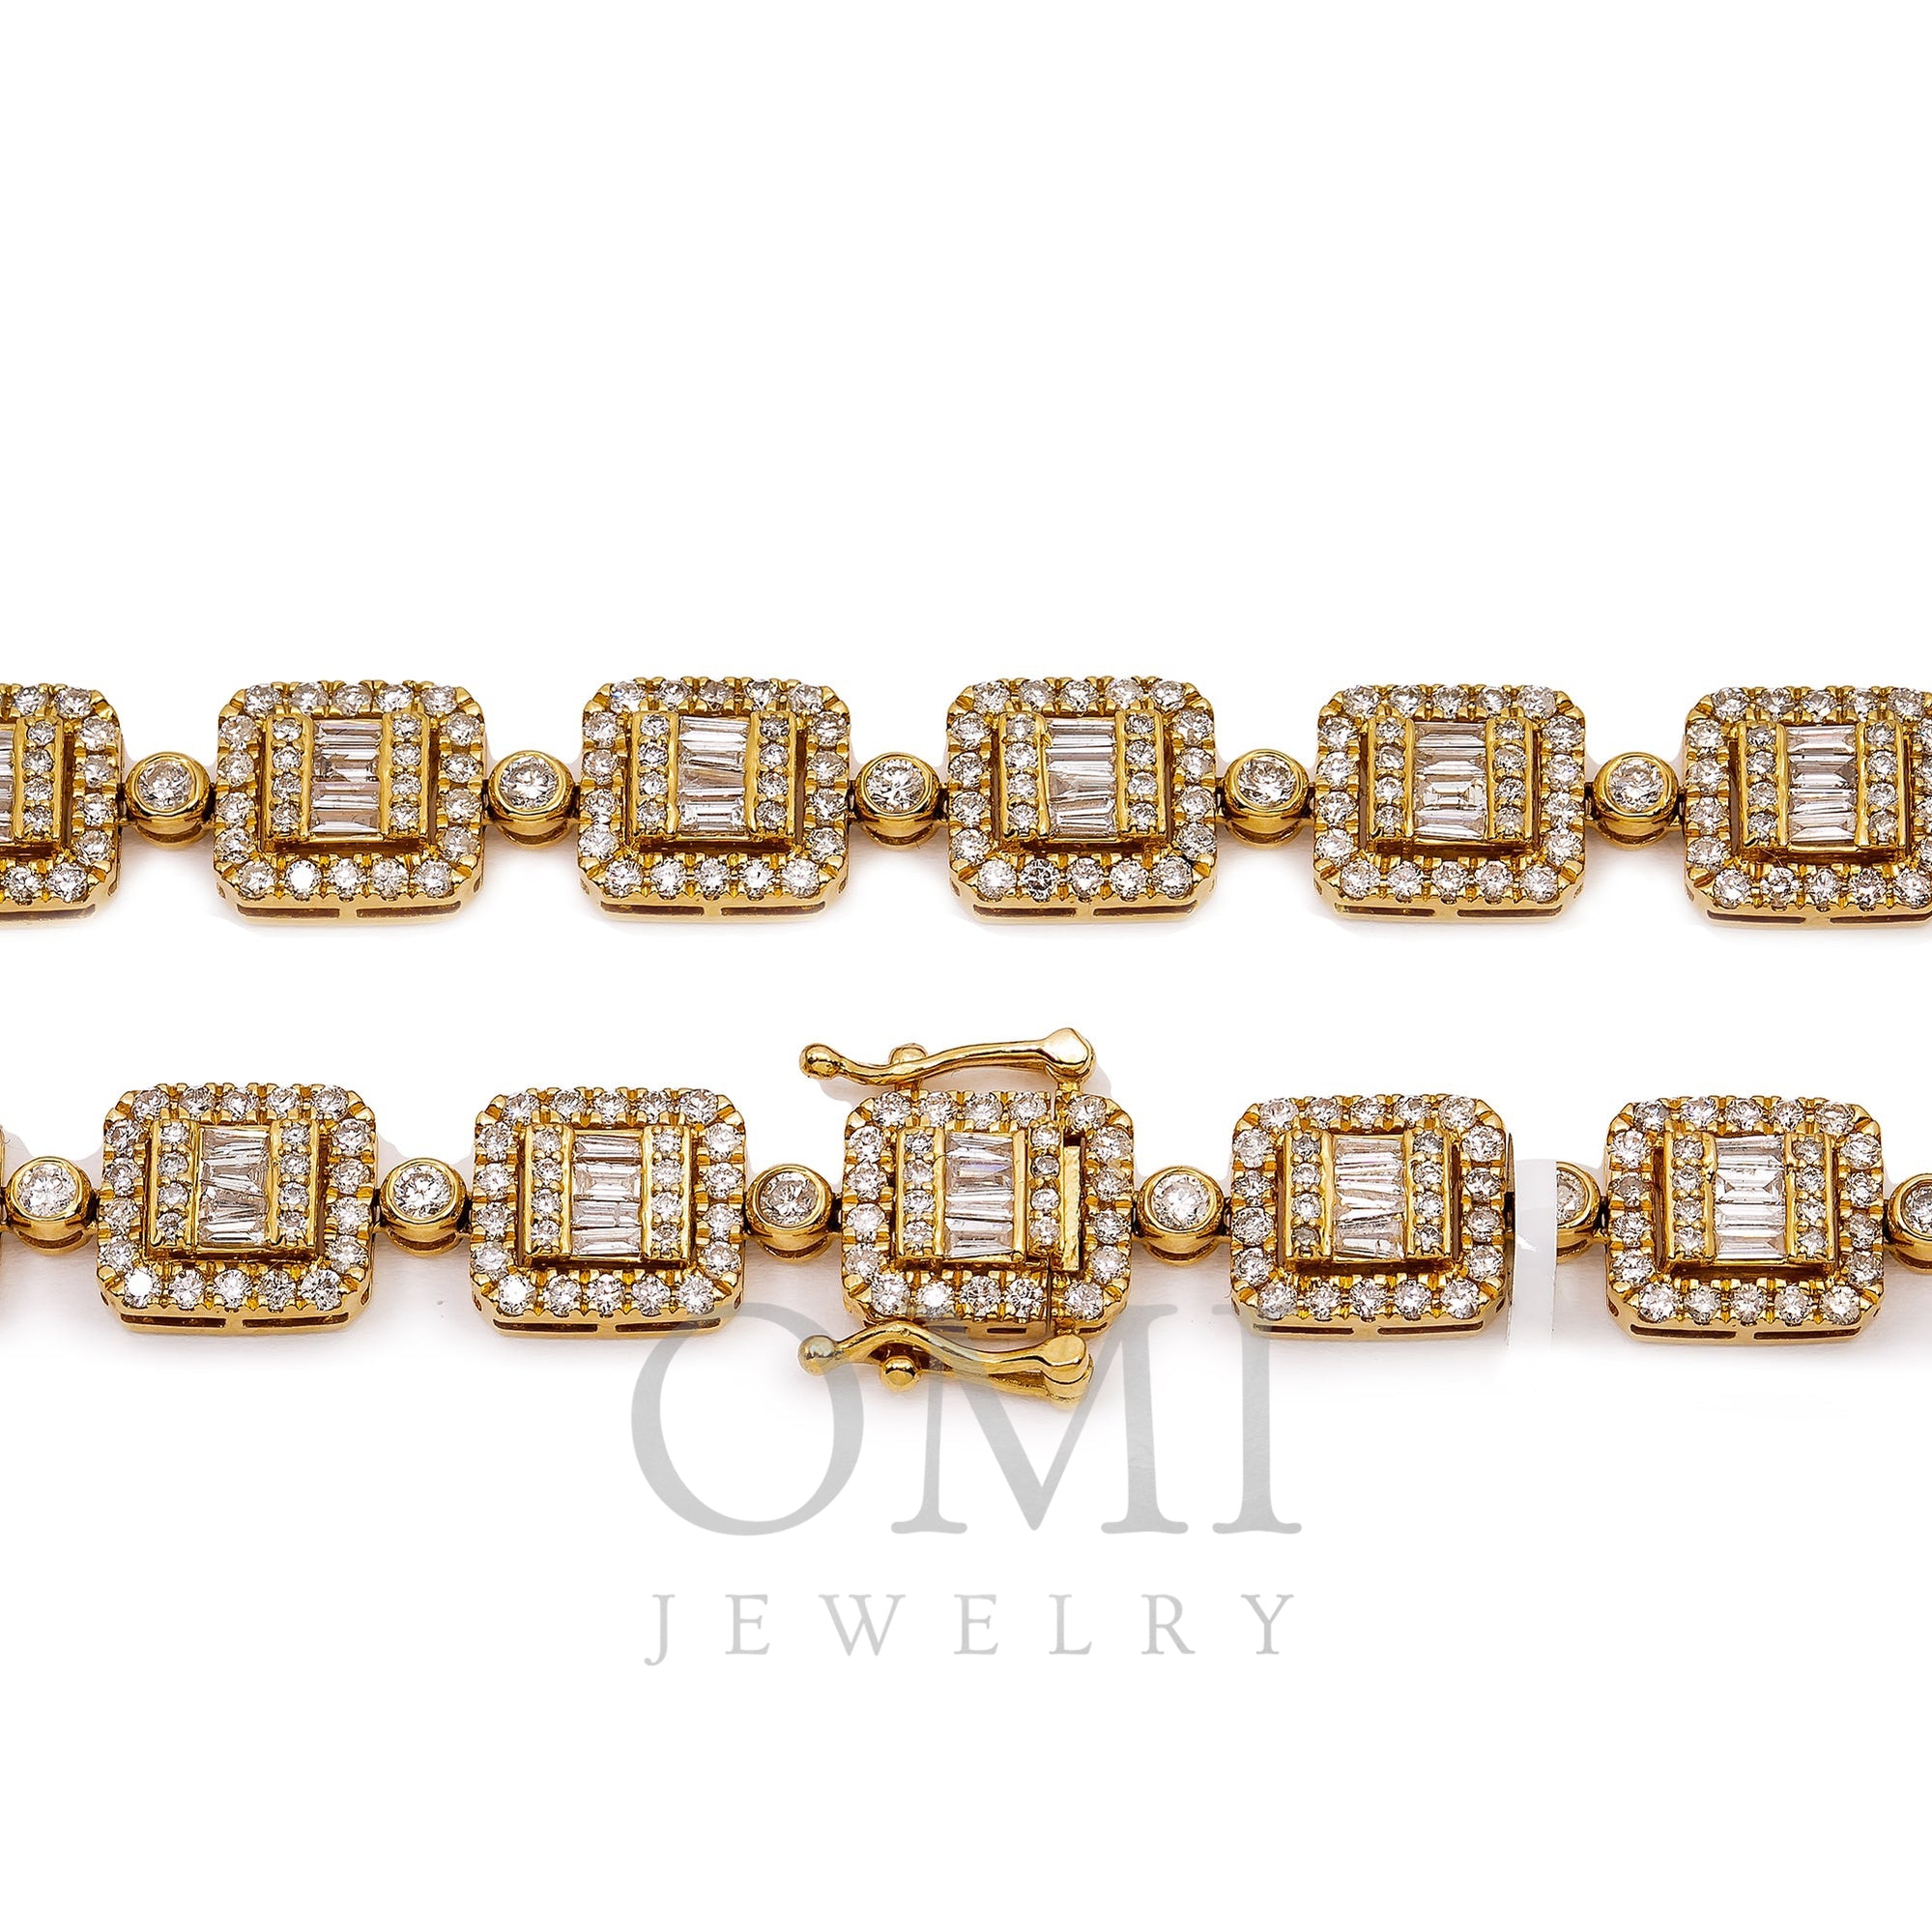 14K YELLOW GOLD 22" BAGUETTE CHAIN WITH 18 CT DIAMONDS